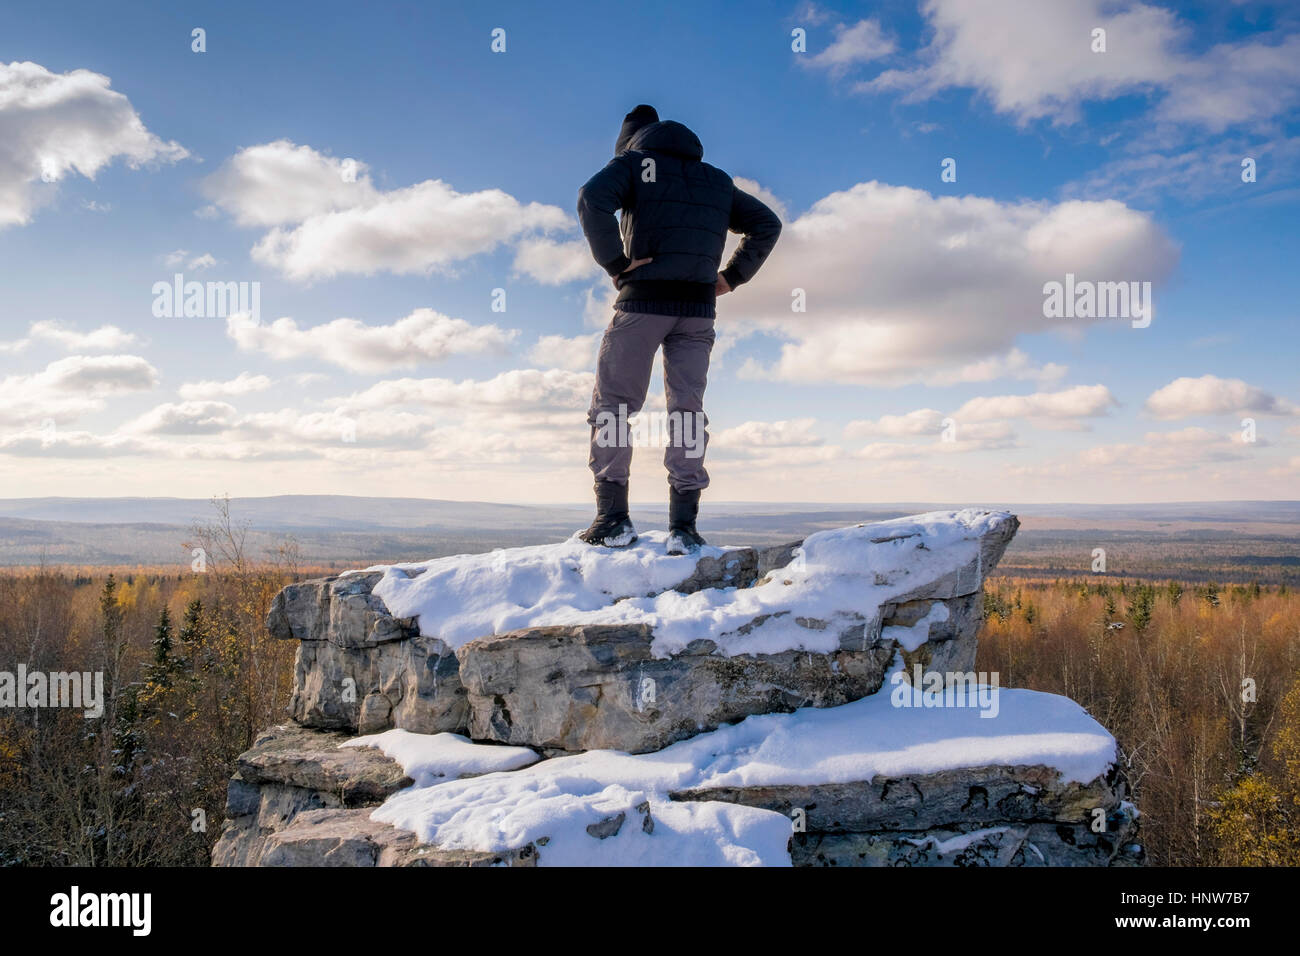 Man viewing landscape from top of rock, Ural, Russia Stock Photo